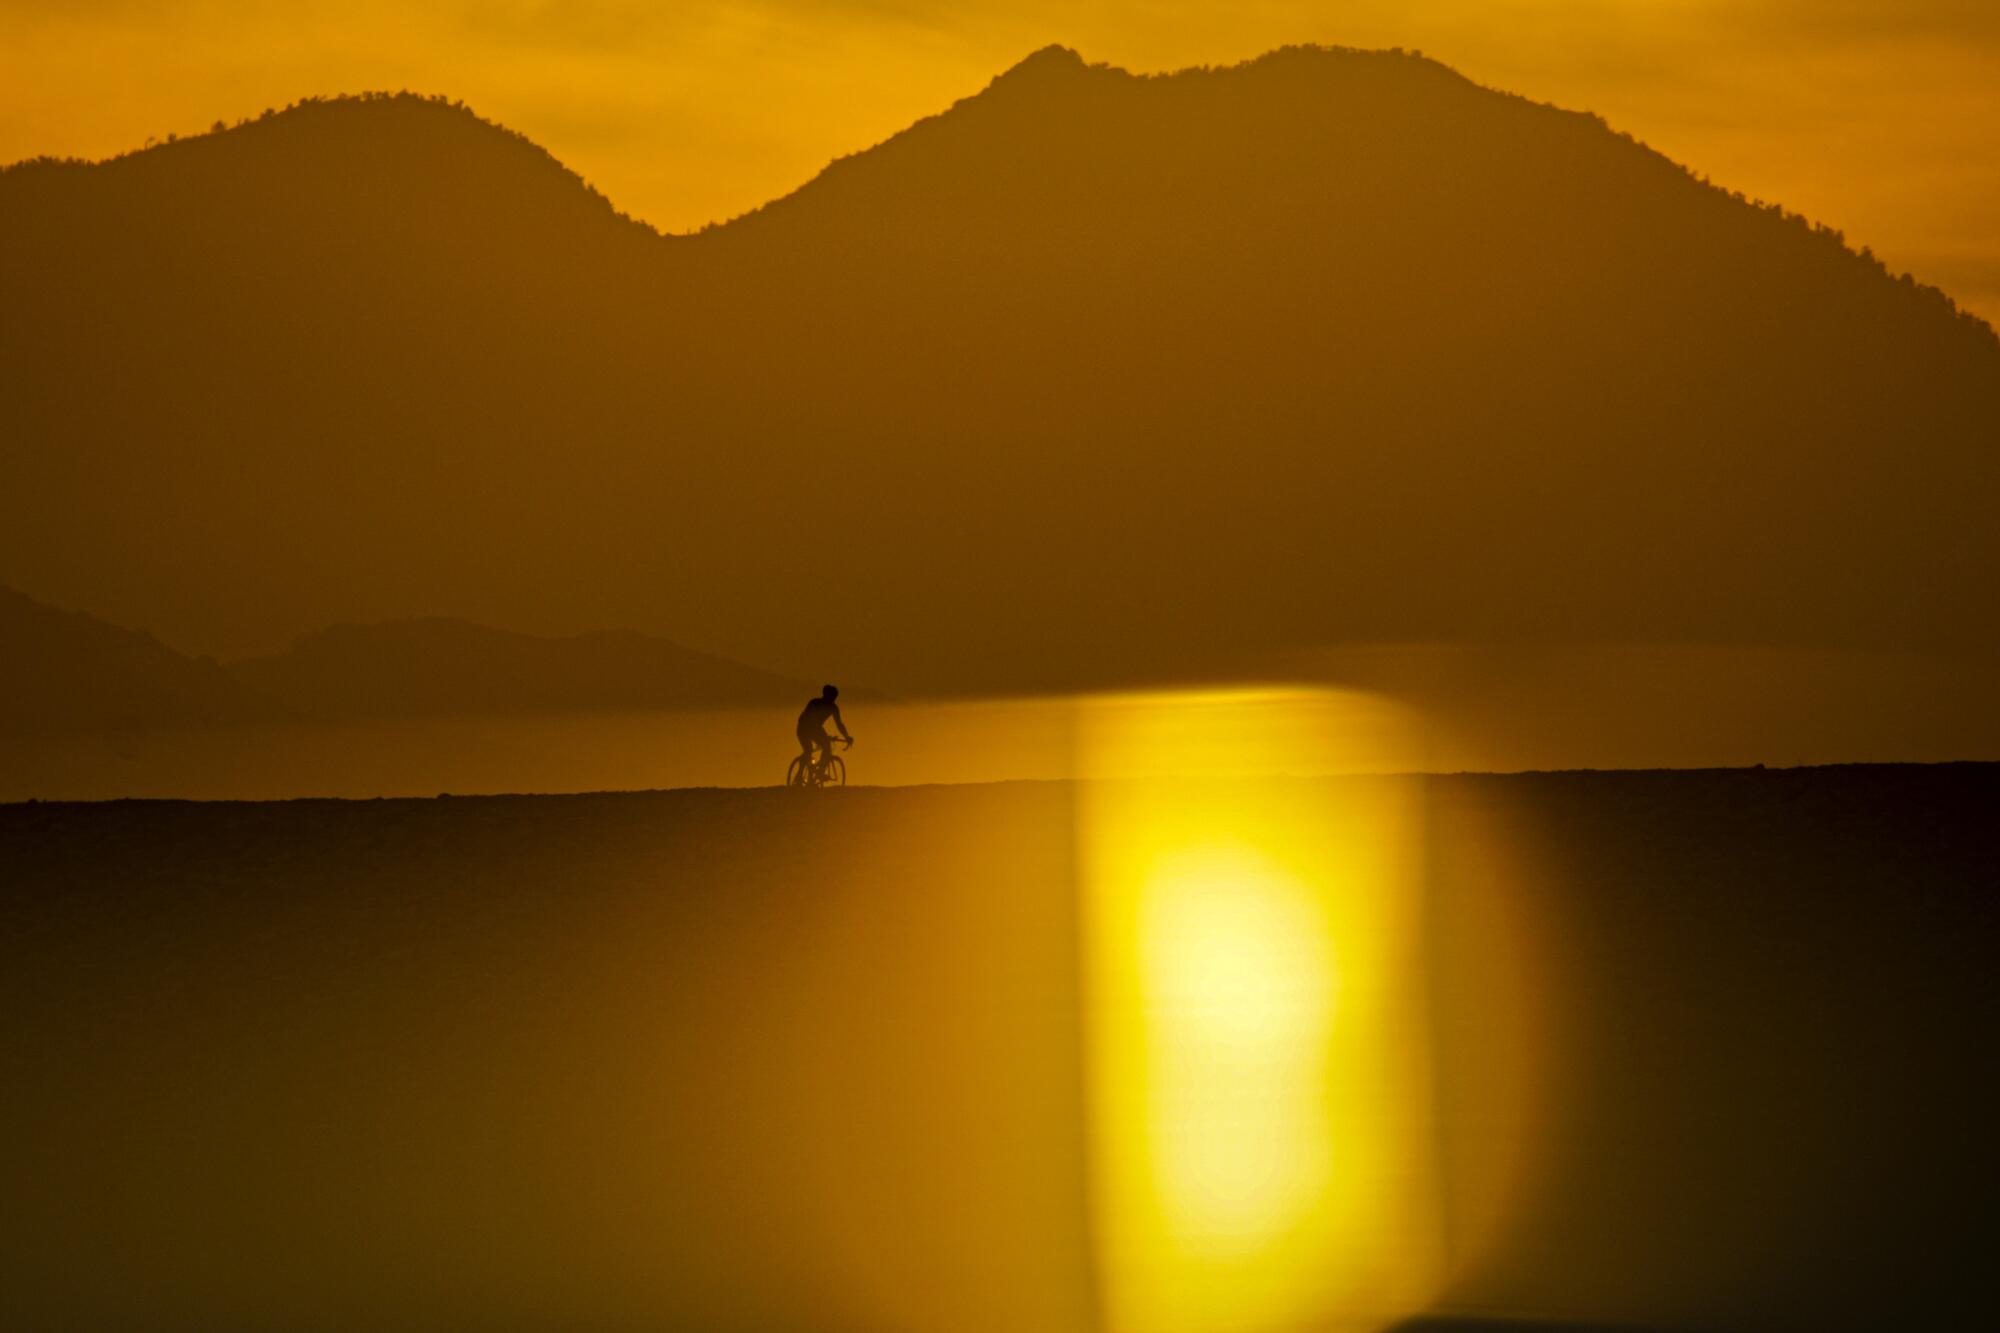 Sunrise over hills and a lone cyclist in silhouette